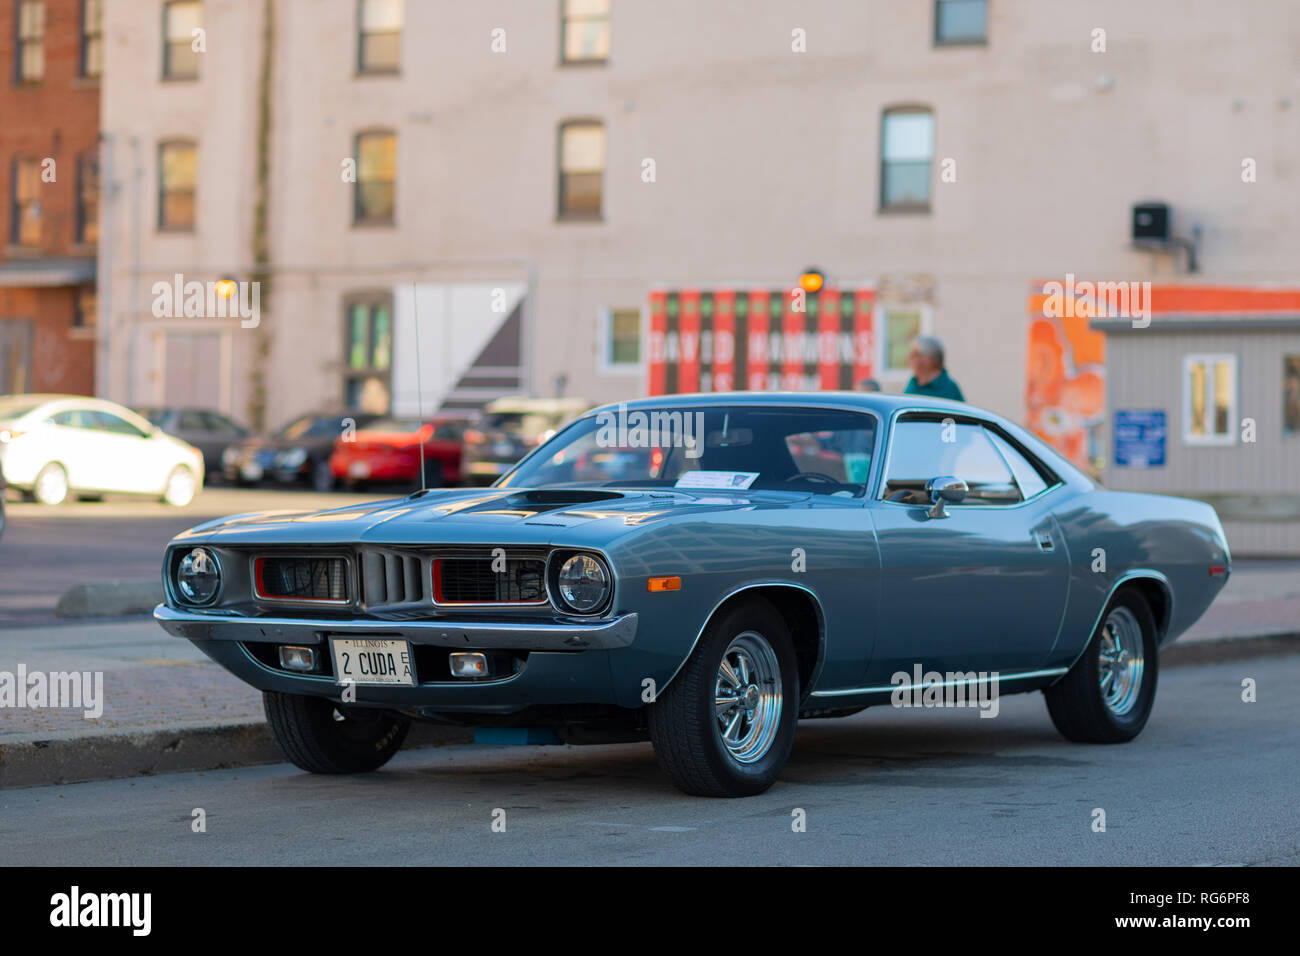 Springfield, Illinois, USA - September 22, 2018: The Route 66 Mother Road Festival, 1972 Plymouth Barracuda Cuda, on the streets of downtown Springfie Stock Photo